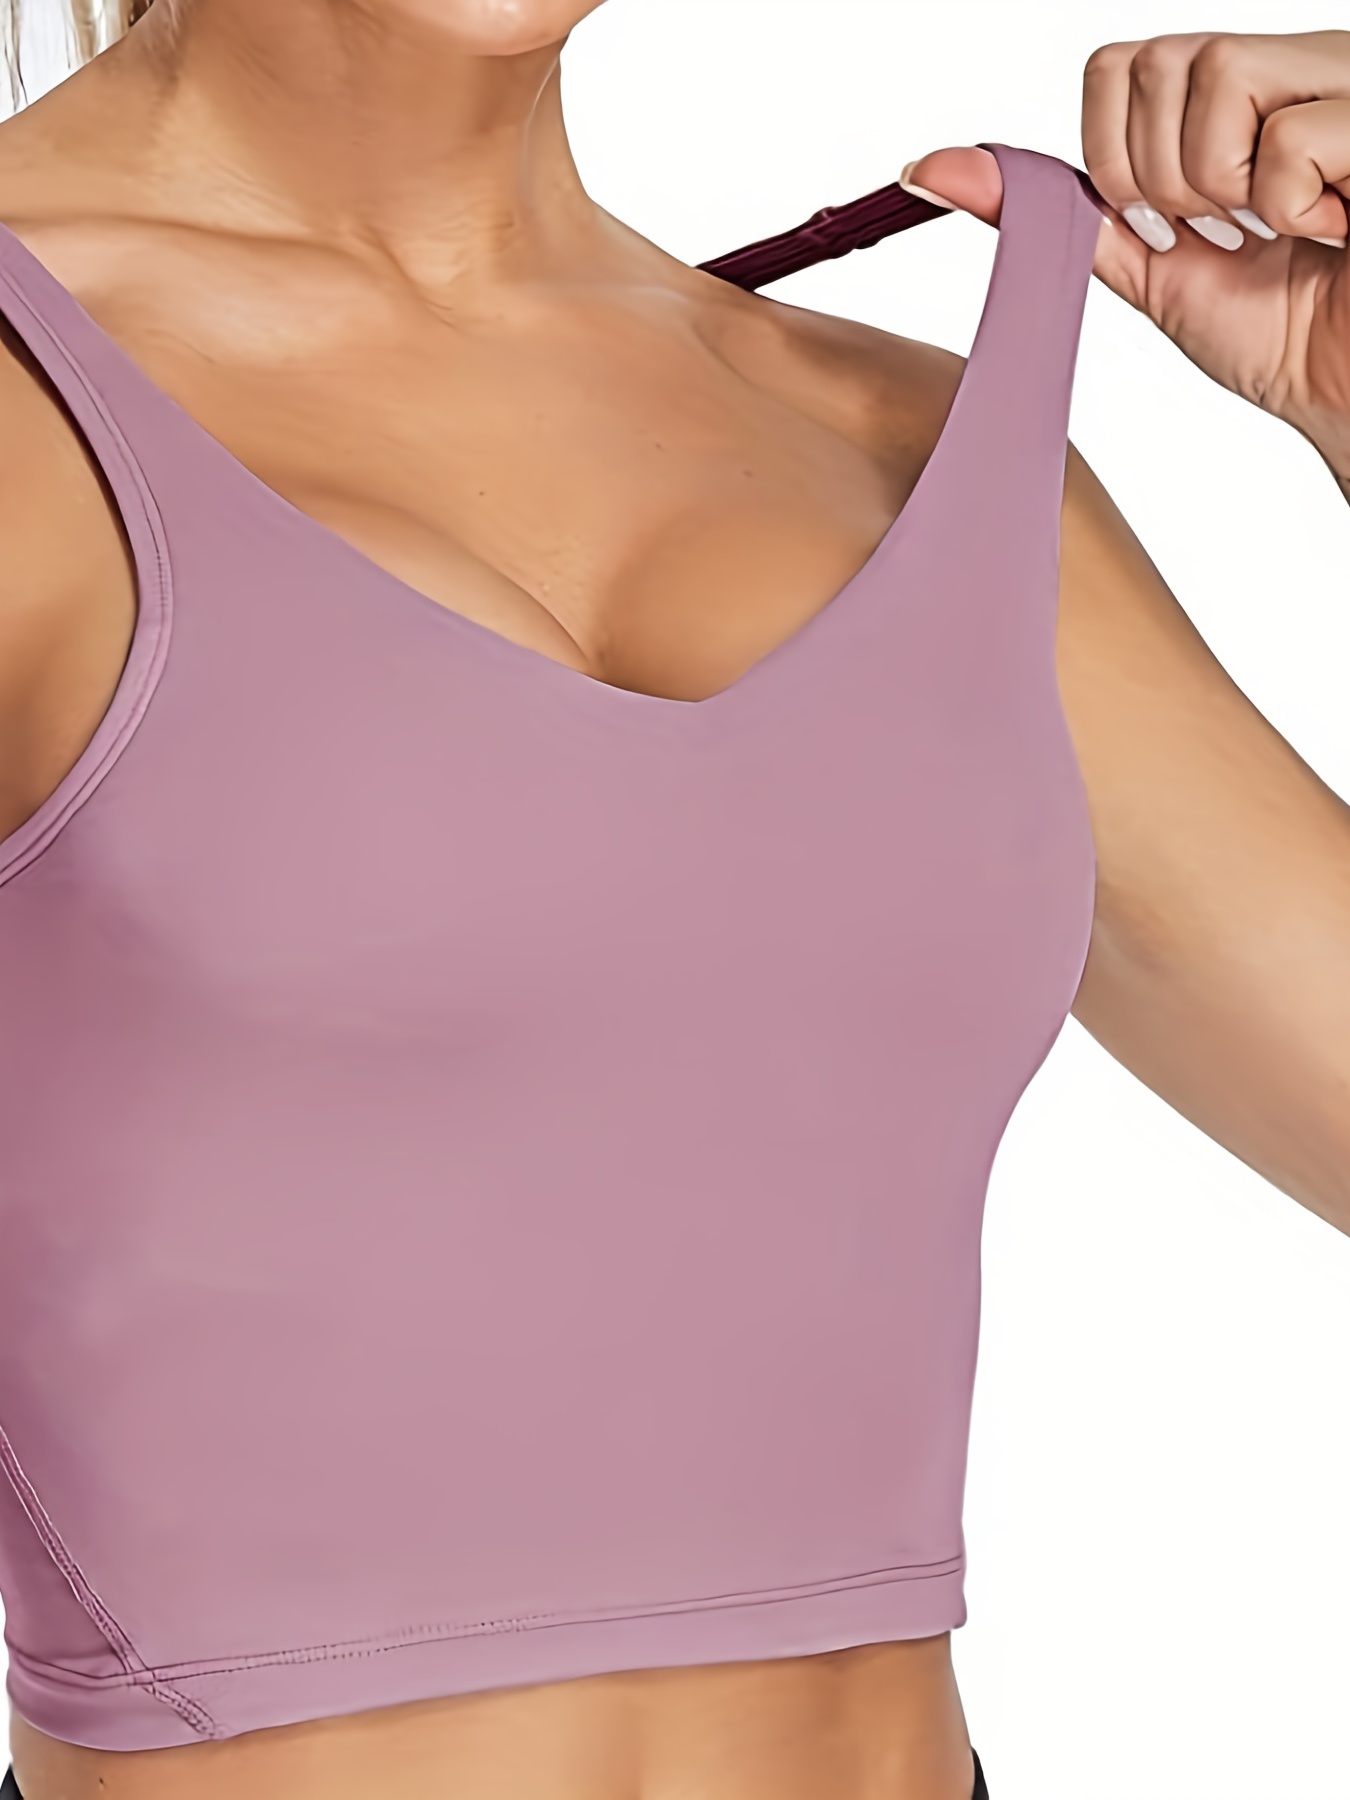 Litthing Sports Bra Women's Wirefree Seamless Padded Yoga Bra Strap  Camisole Short Tank Tops (Pink - ShopStyle